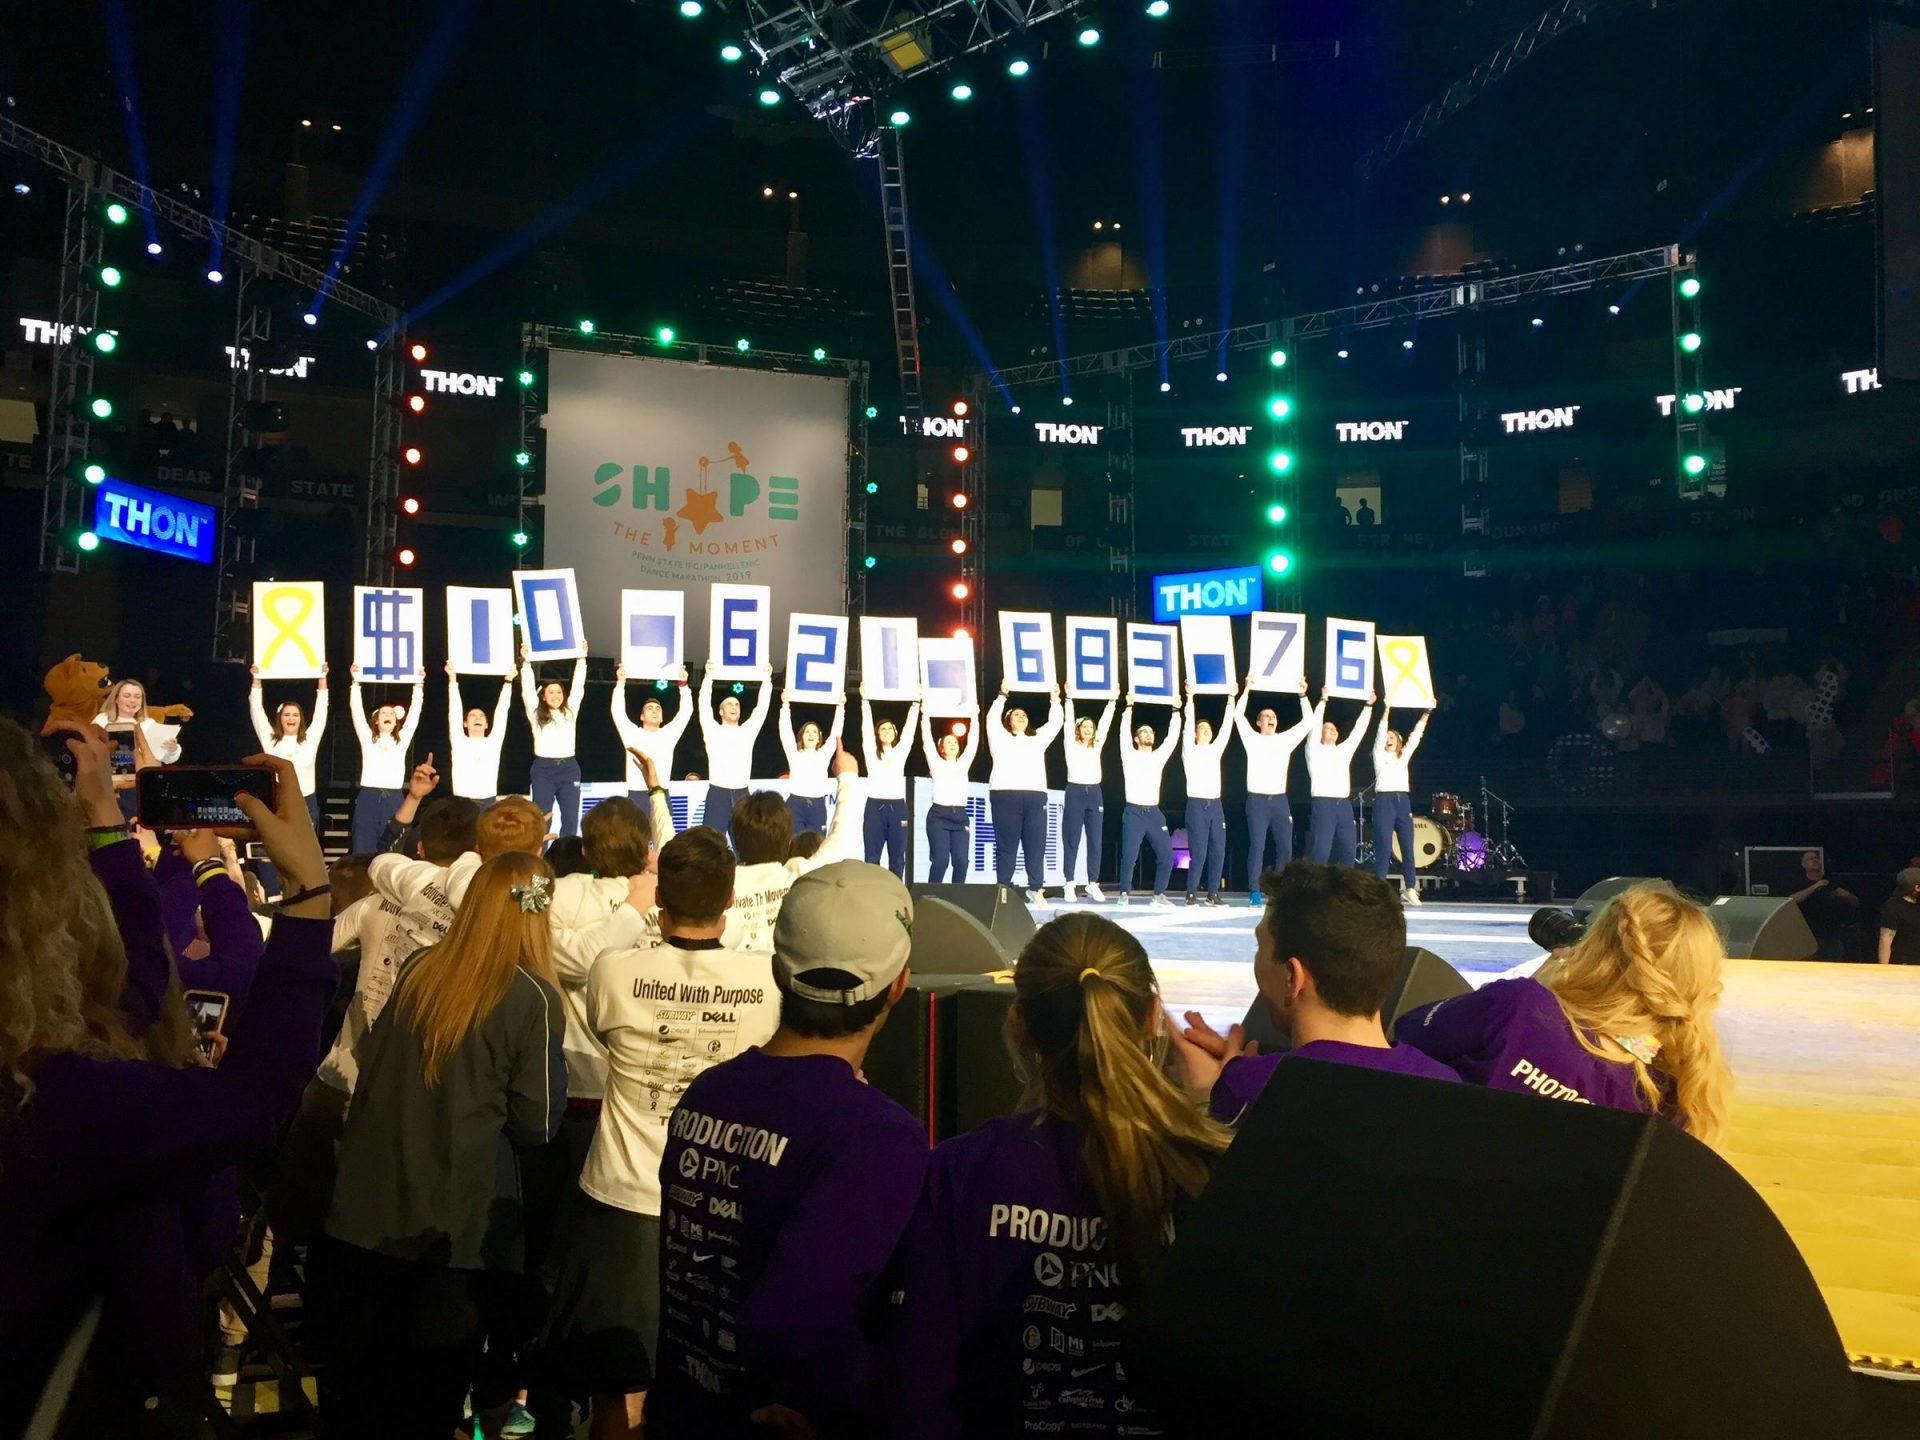 Penn State's THON raised more than $10 million for pediatric cancer in 2019.